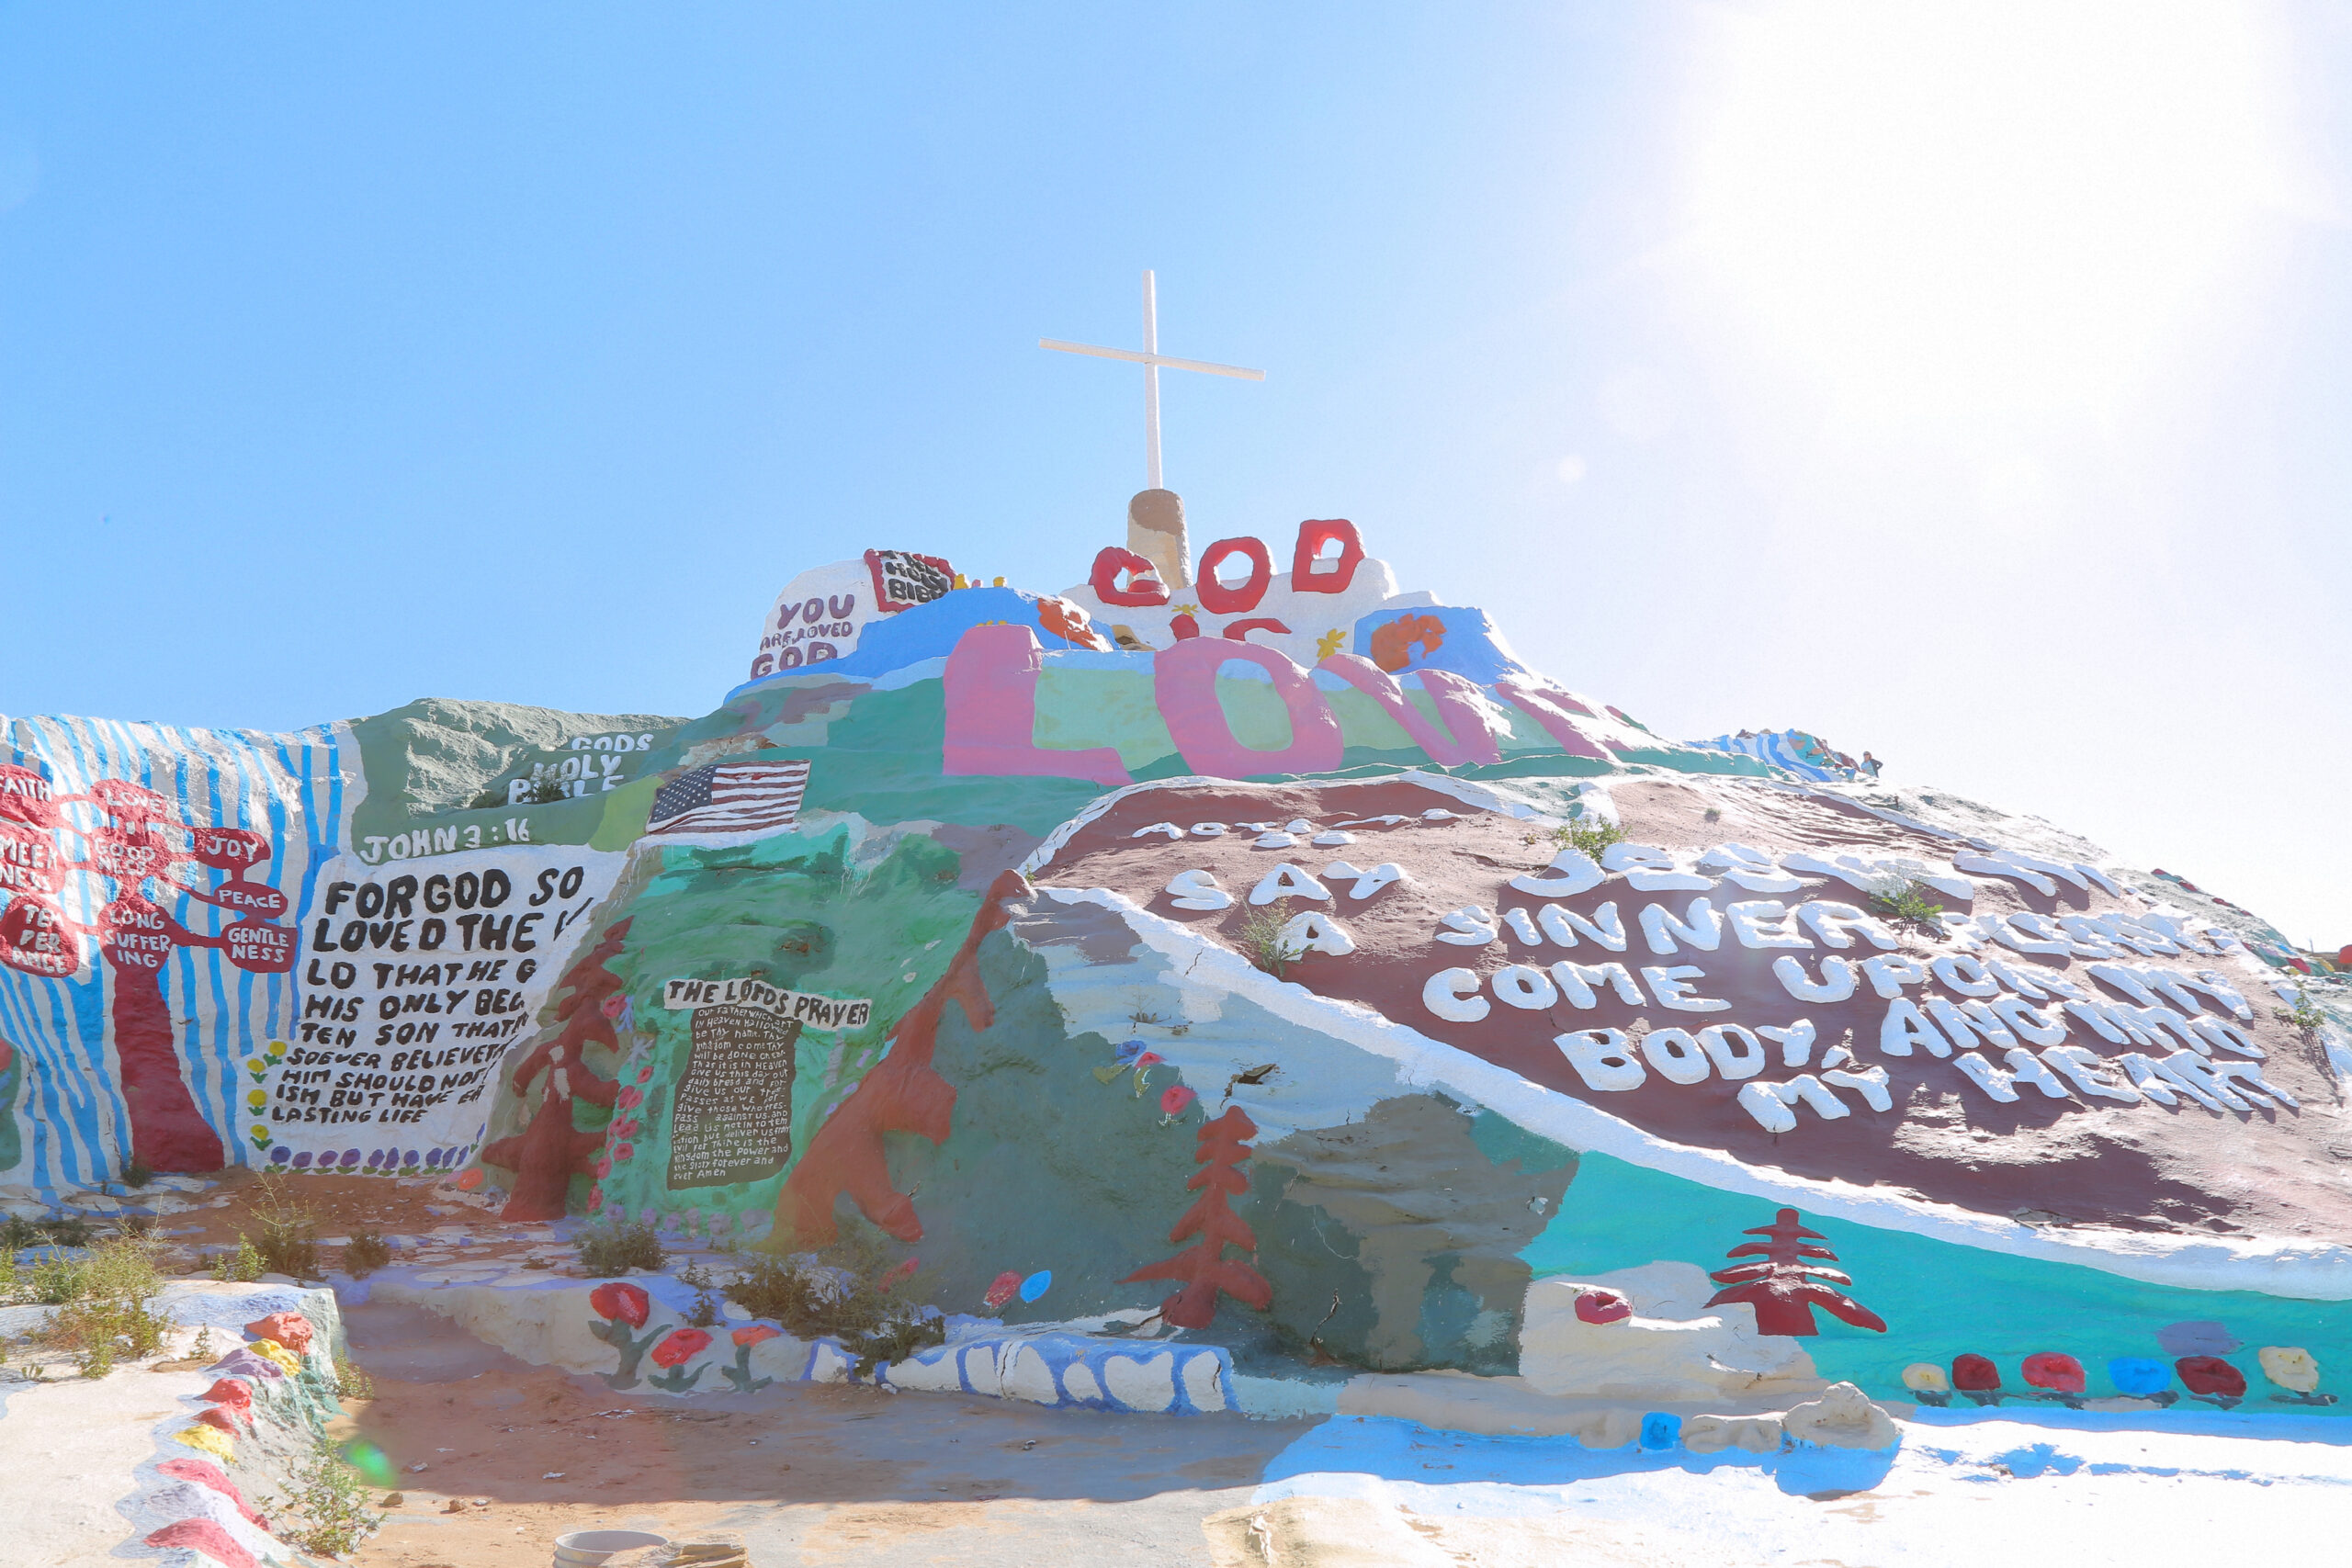 Hand assembled and painted Salvation Mountain outsider art in Southern California.